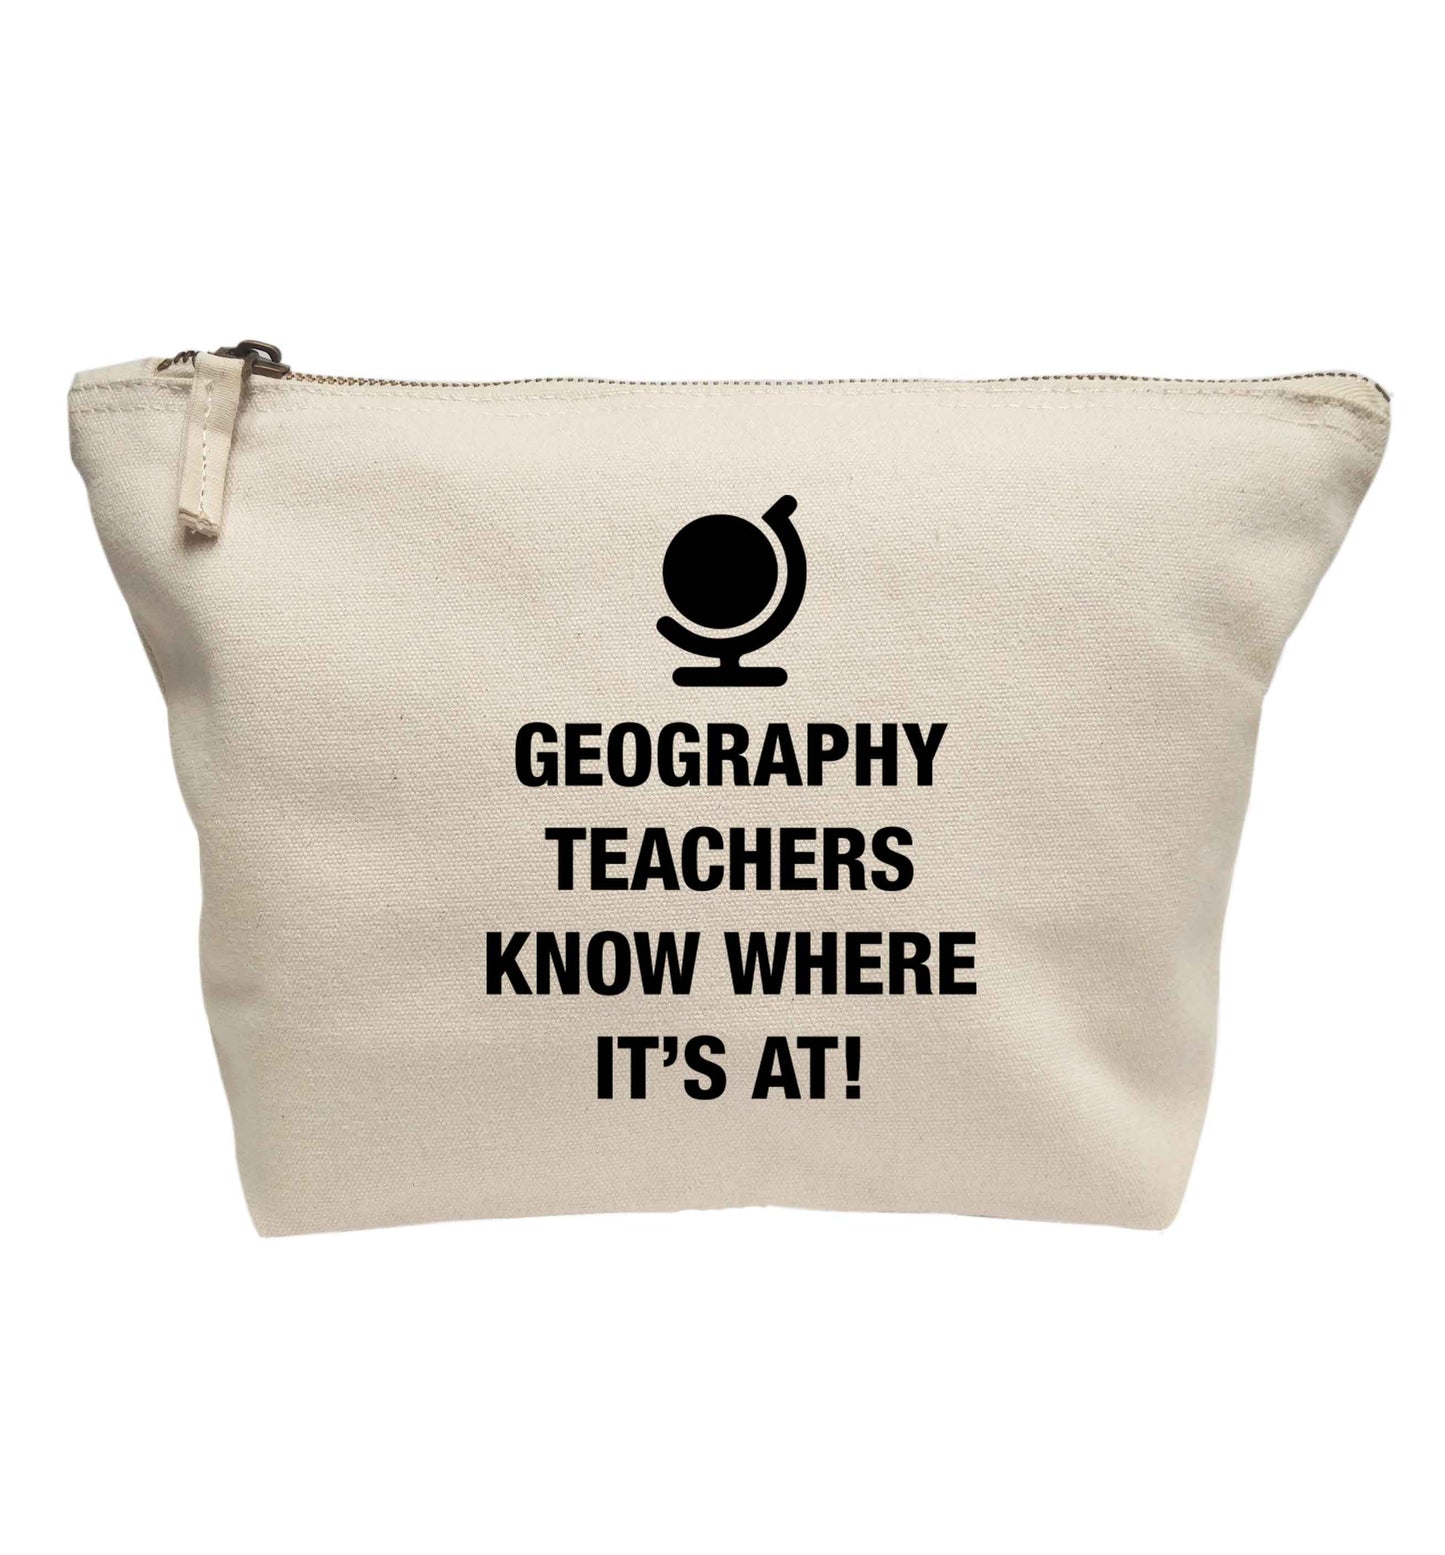 Geography teachers know where it's at | Makeup / wash bag